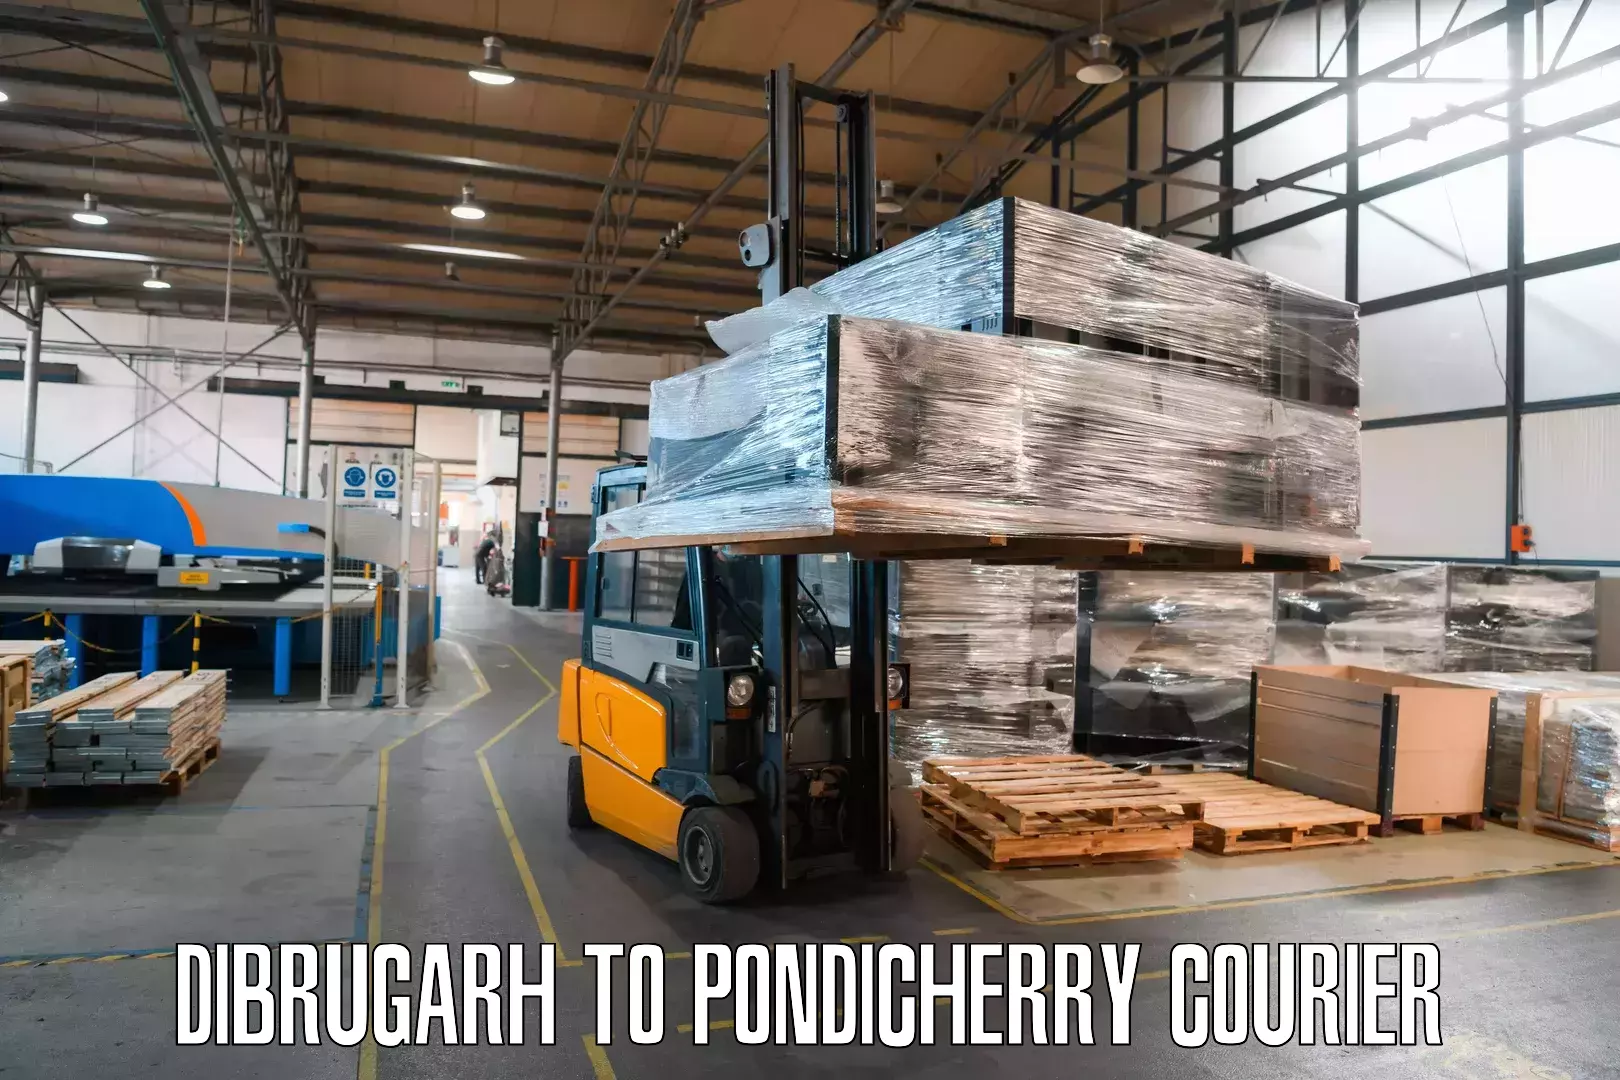 Multi-national courier services Dibrugarh to Pondicherry